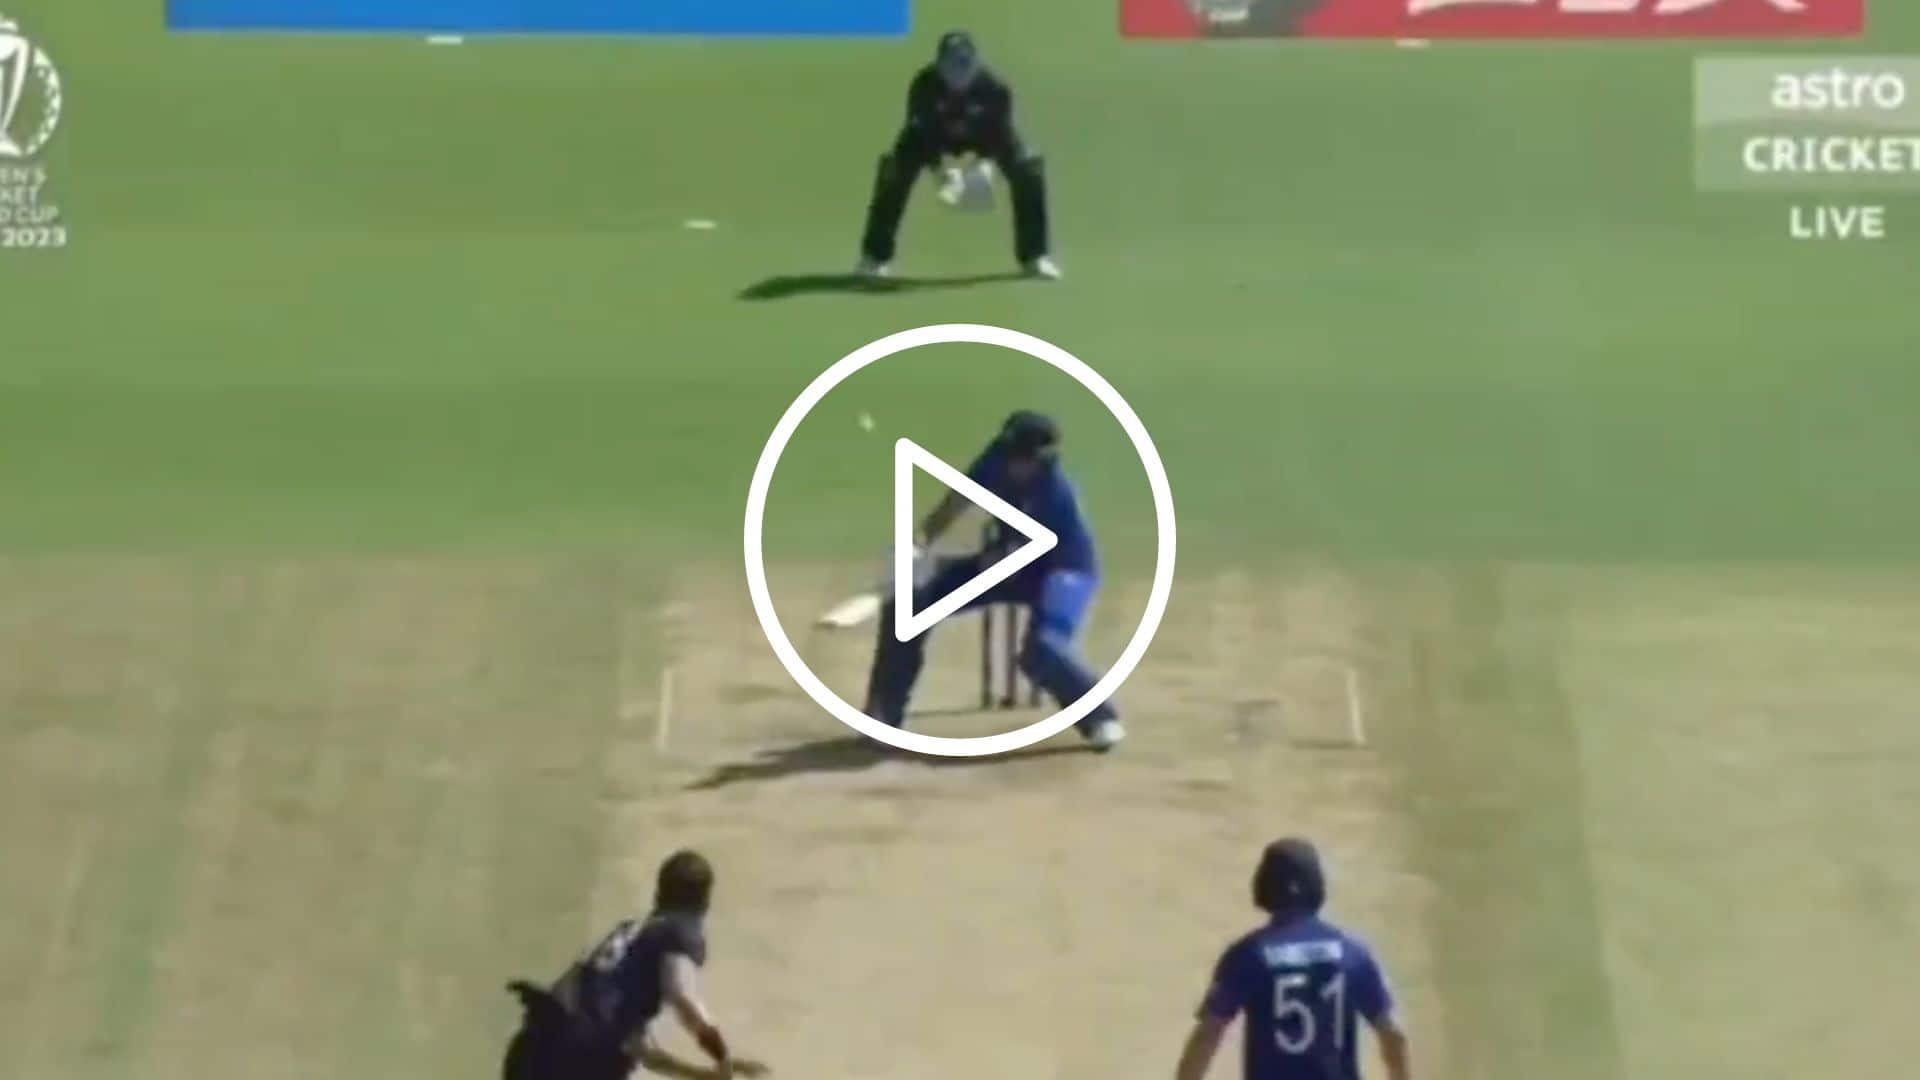 [Watch] Joe Root Reverse Scoops Trent Boult For An Audacious Six Over Third Man